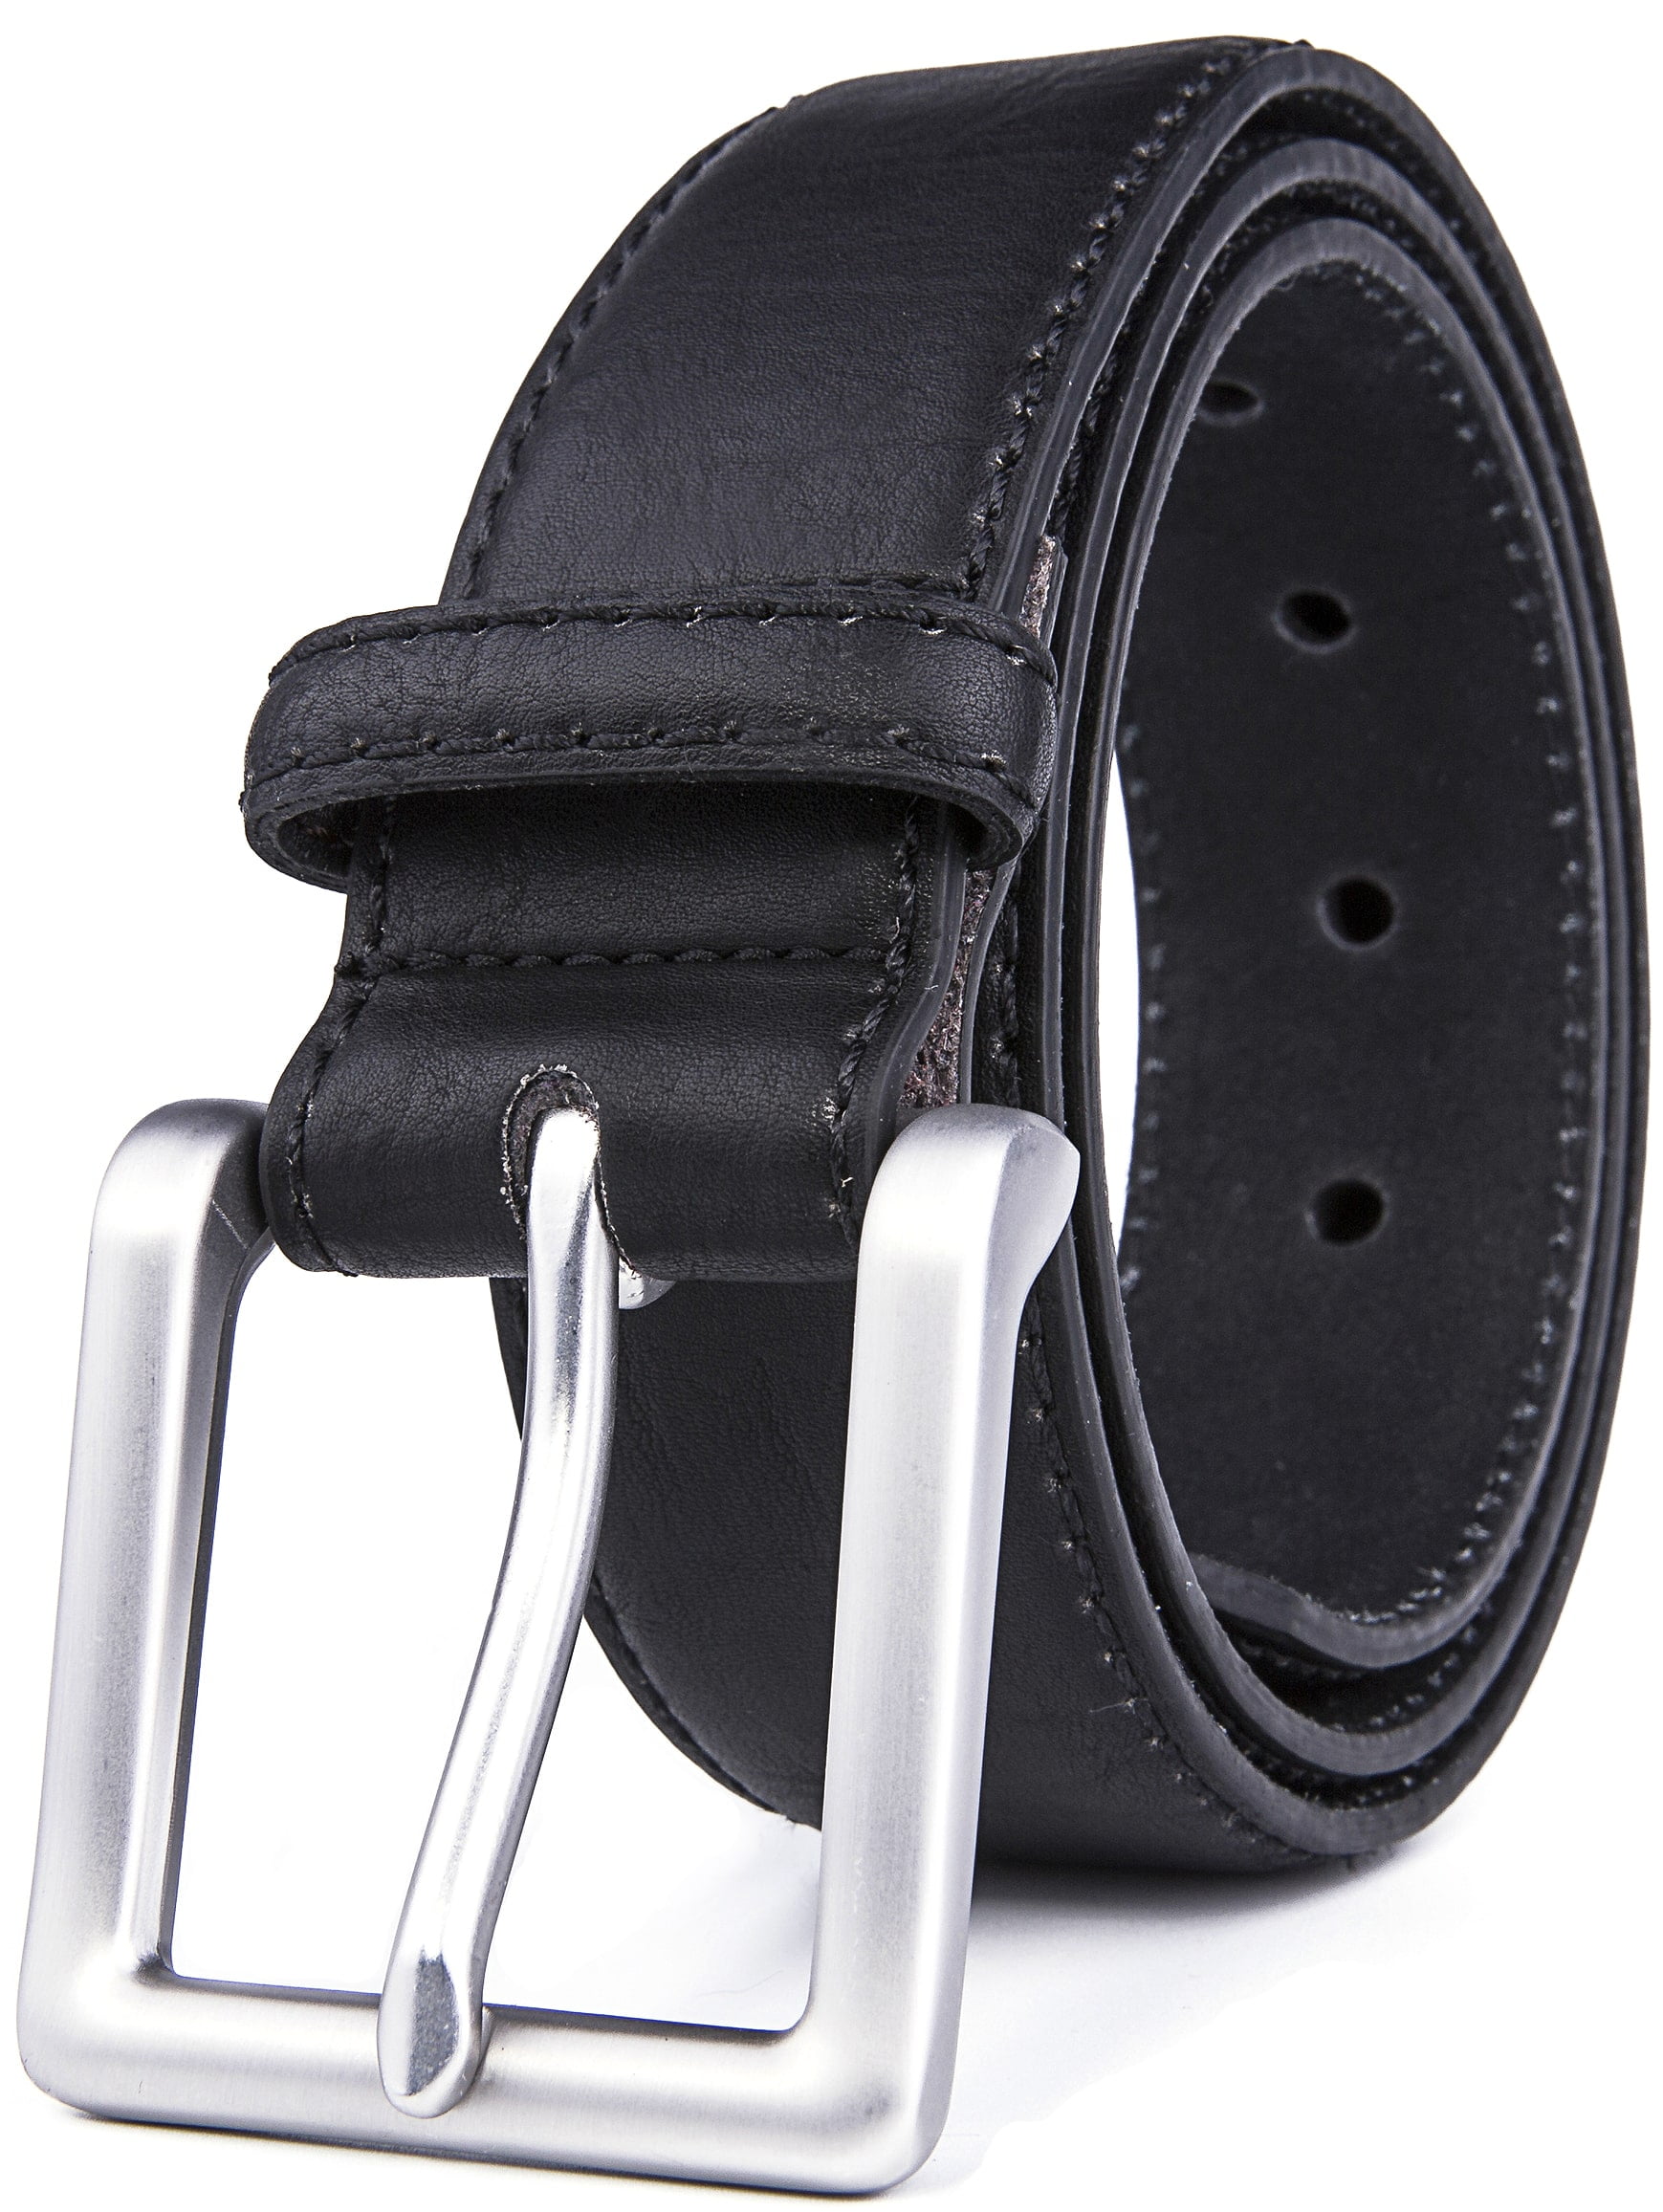 USA Mens Casual Full Grain Classic Leather Dress Belt For Jeans,1.25 Wide